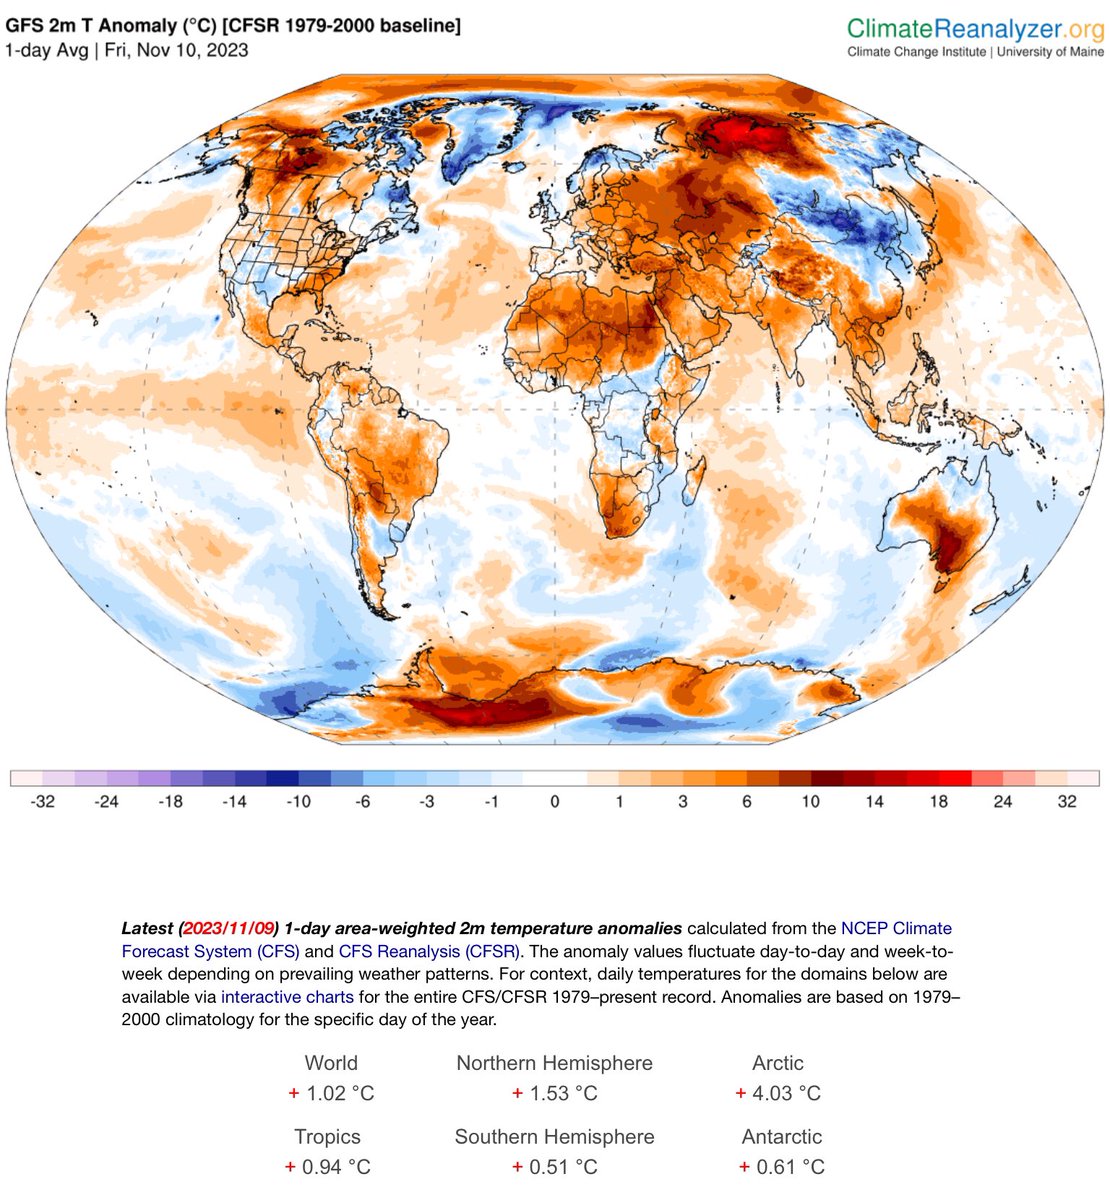 The Arctic is currently over 4°C above normal. There will be consequences!